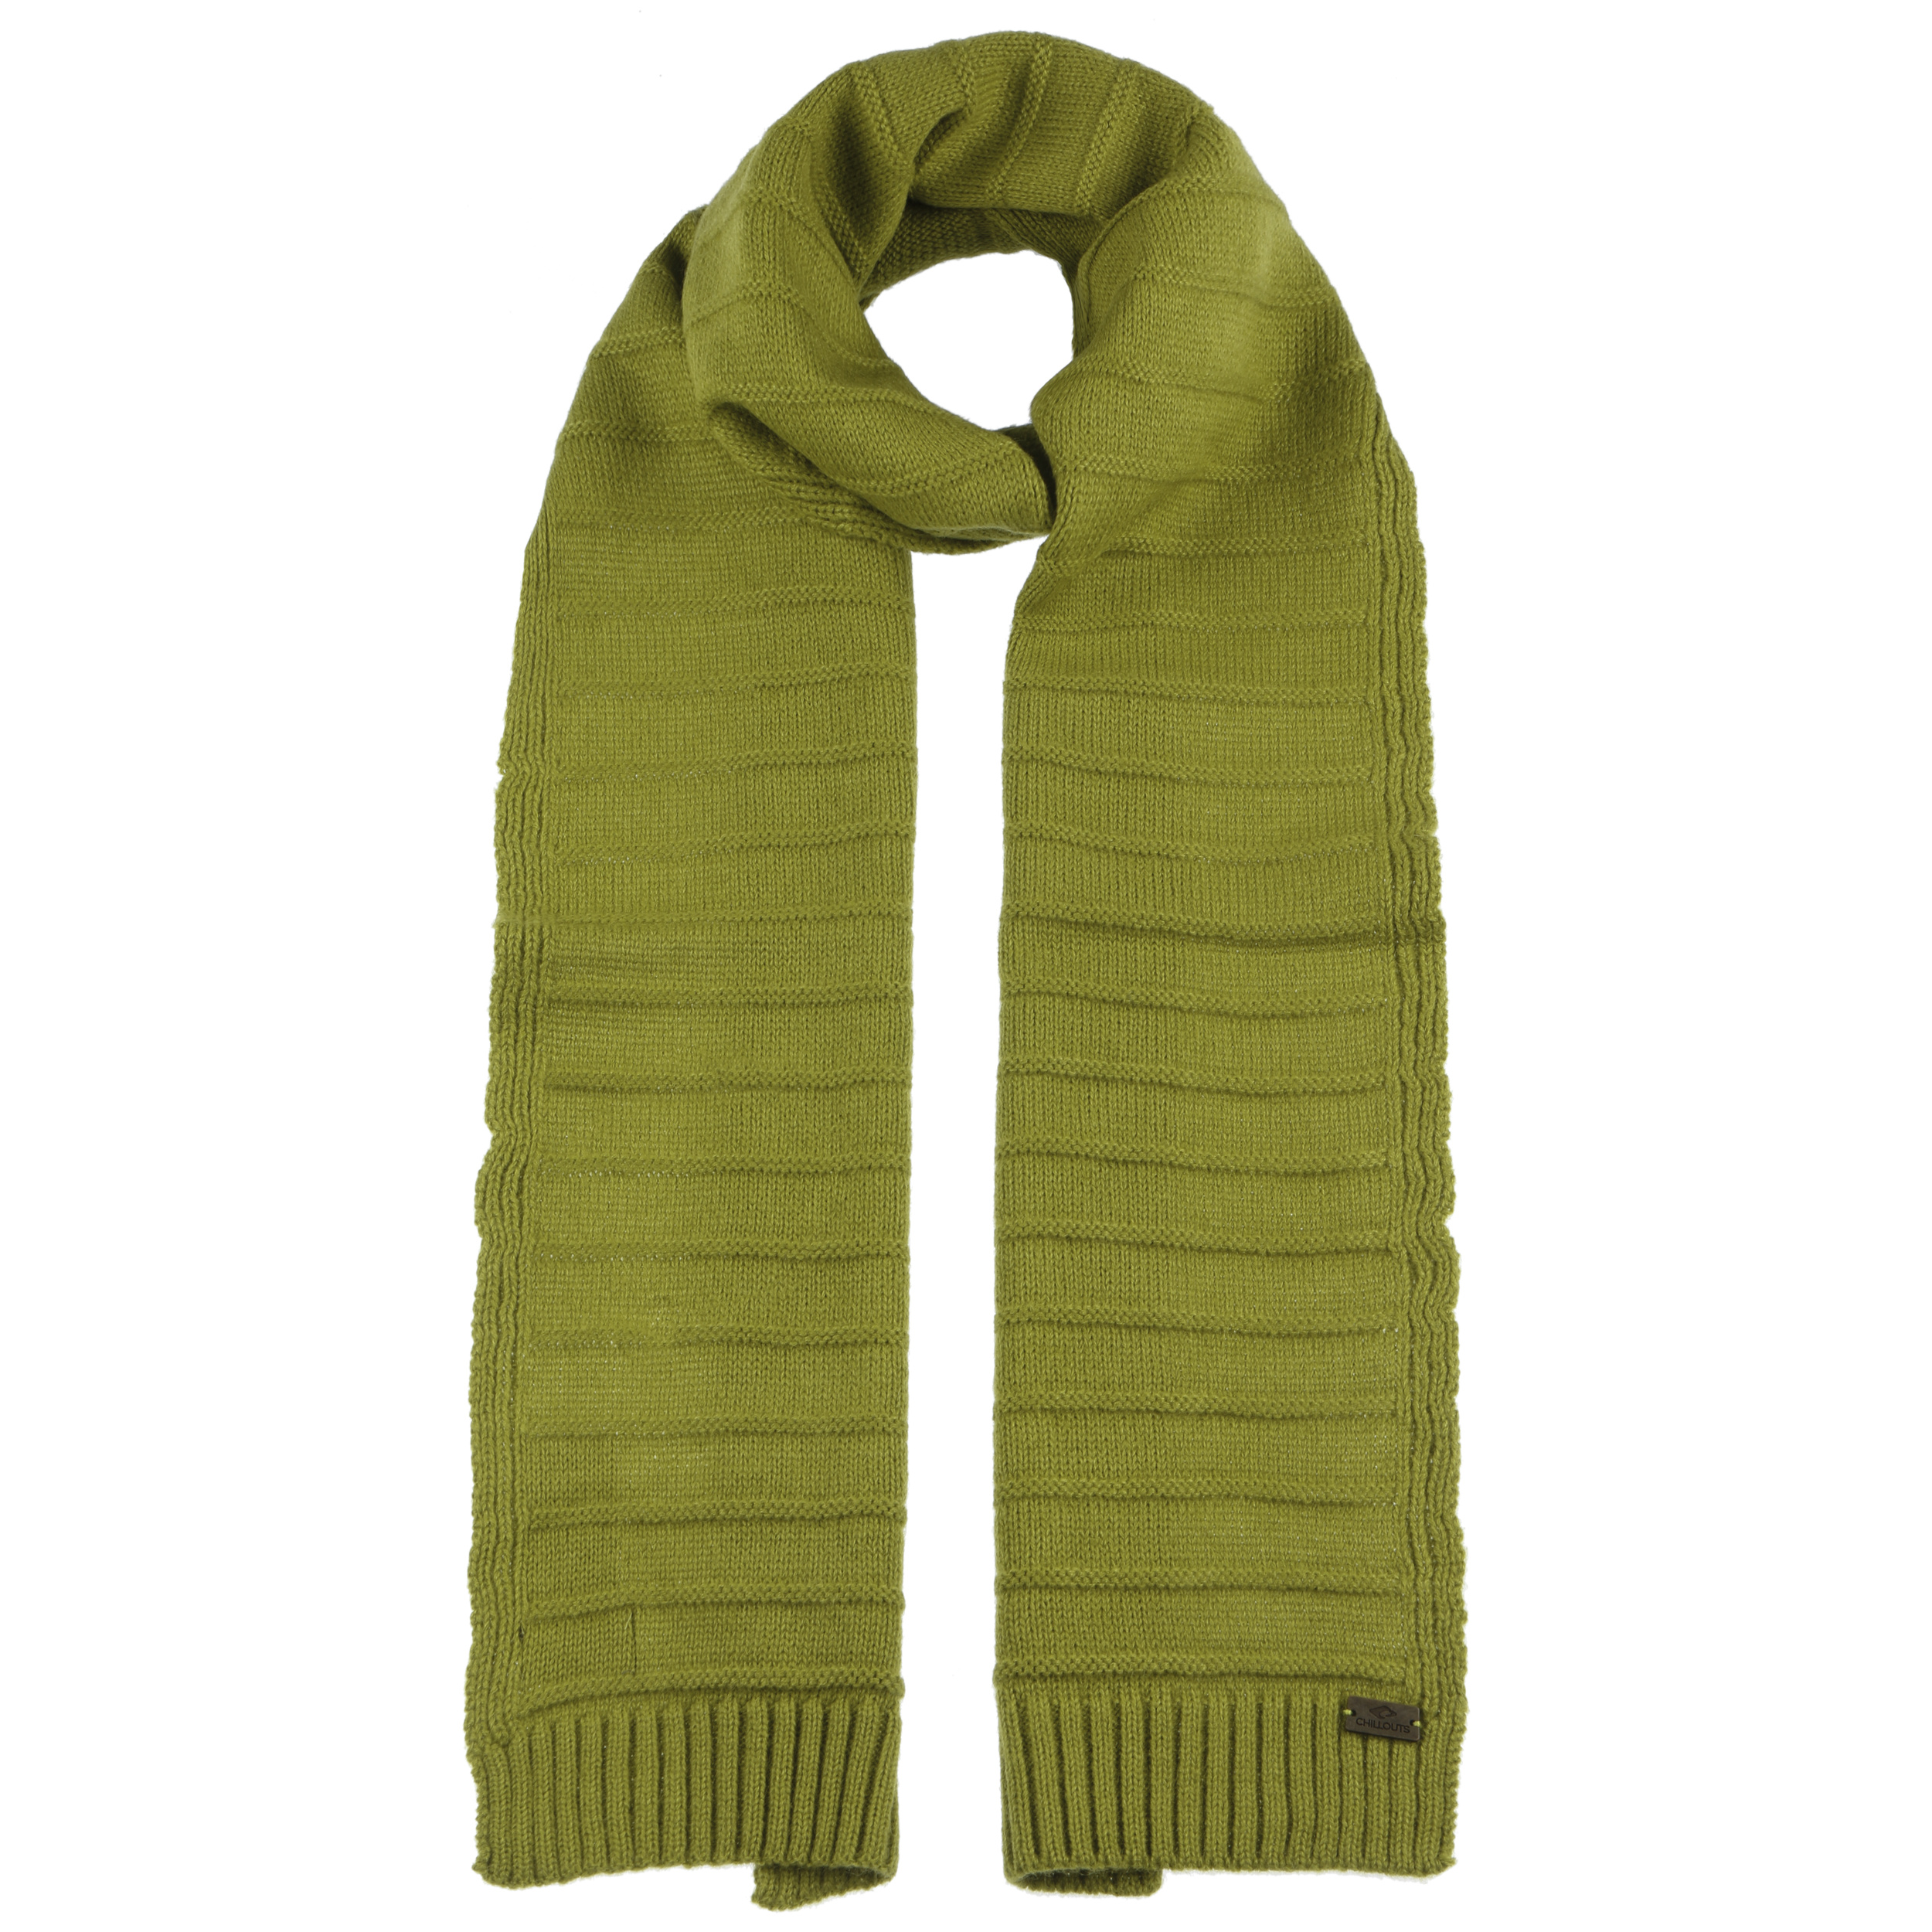 29,99 Chillouts - € Strickschal Arne by